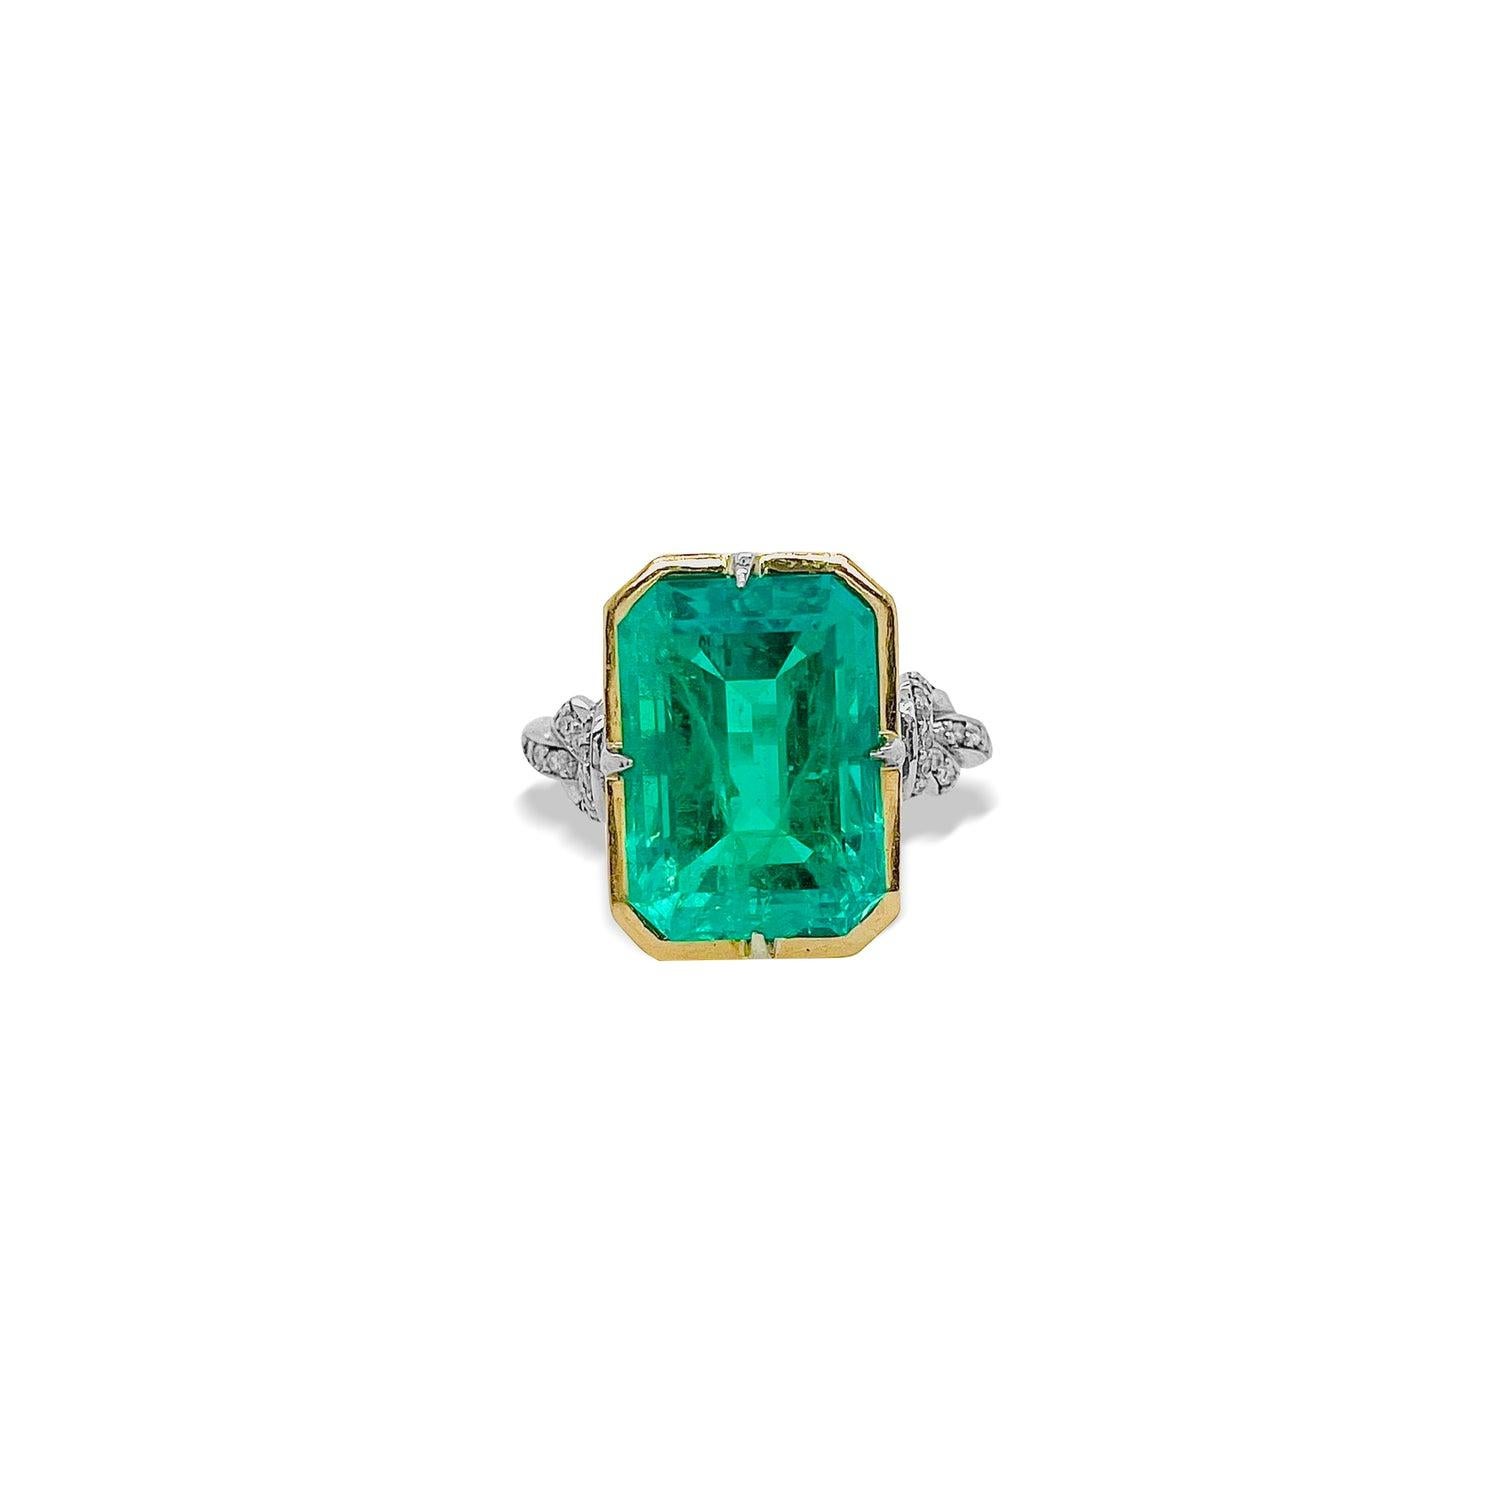 5.79ct Zambian Emerald in Forget Me Knot Style Ring 9